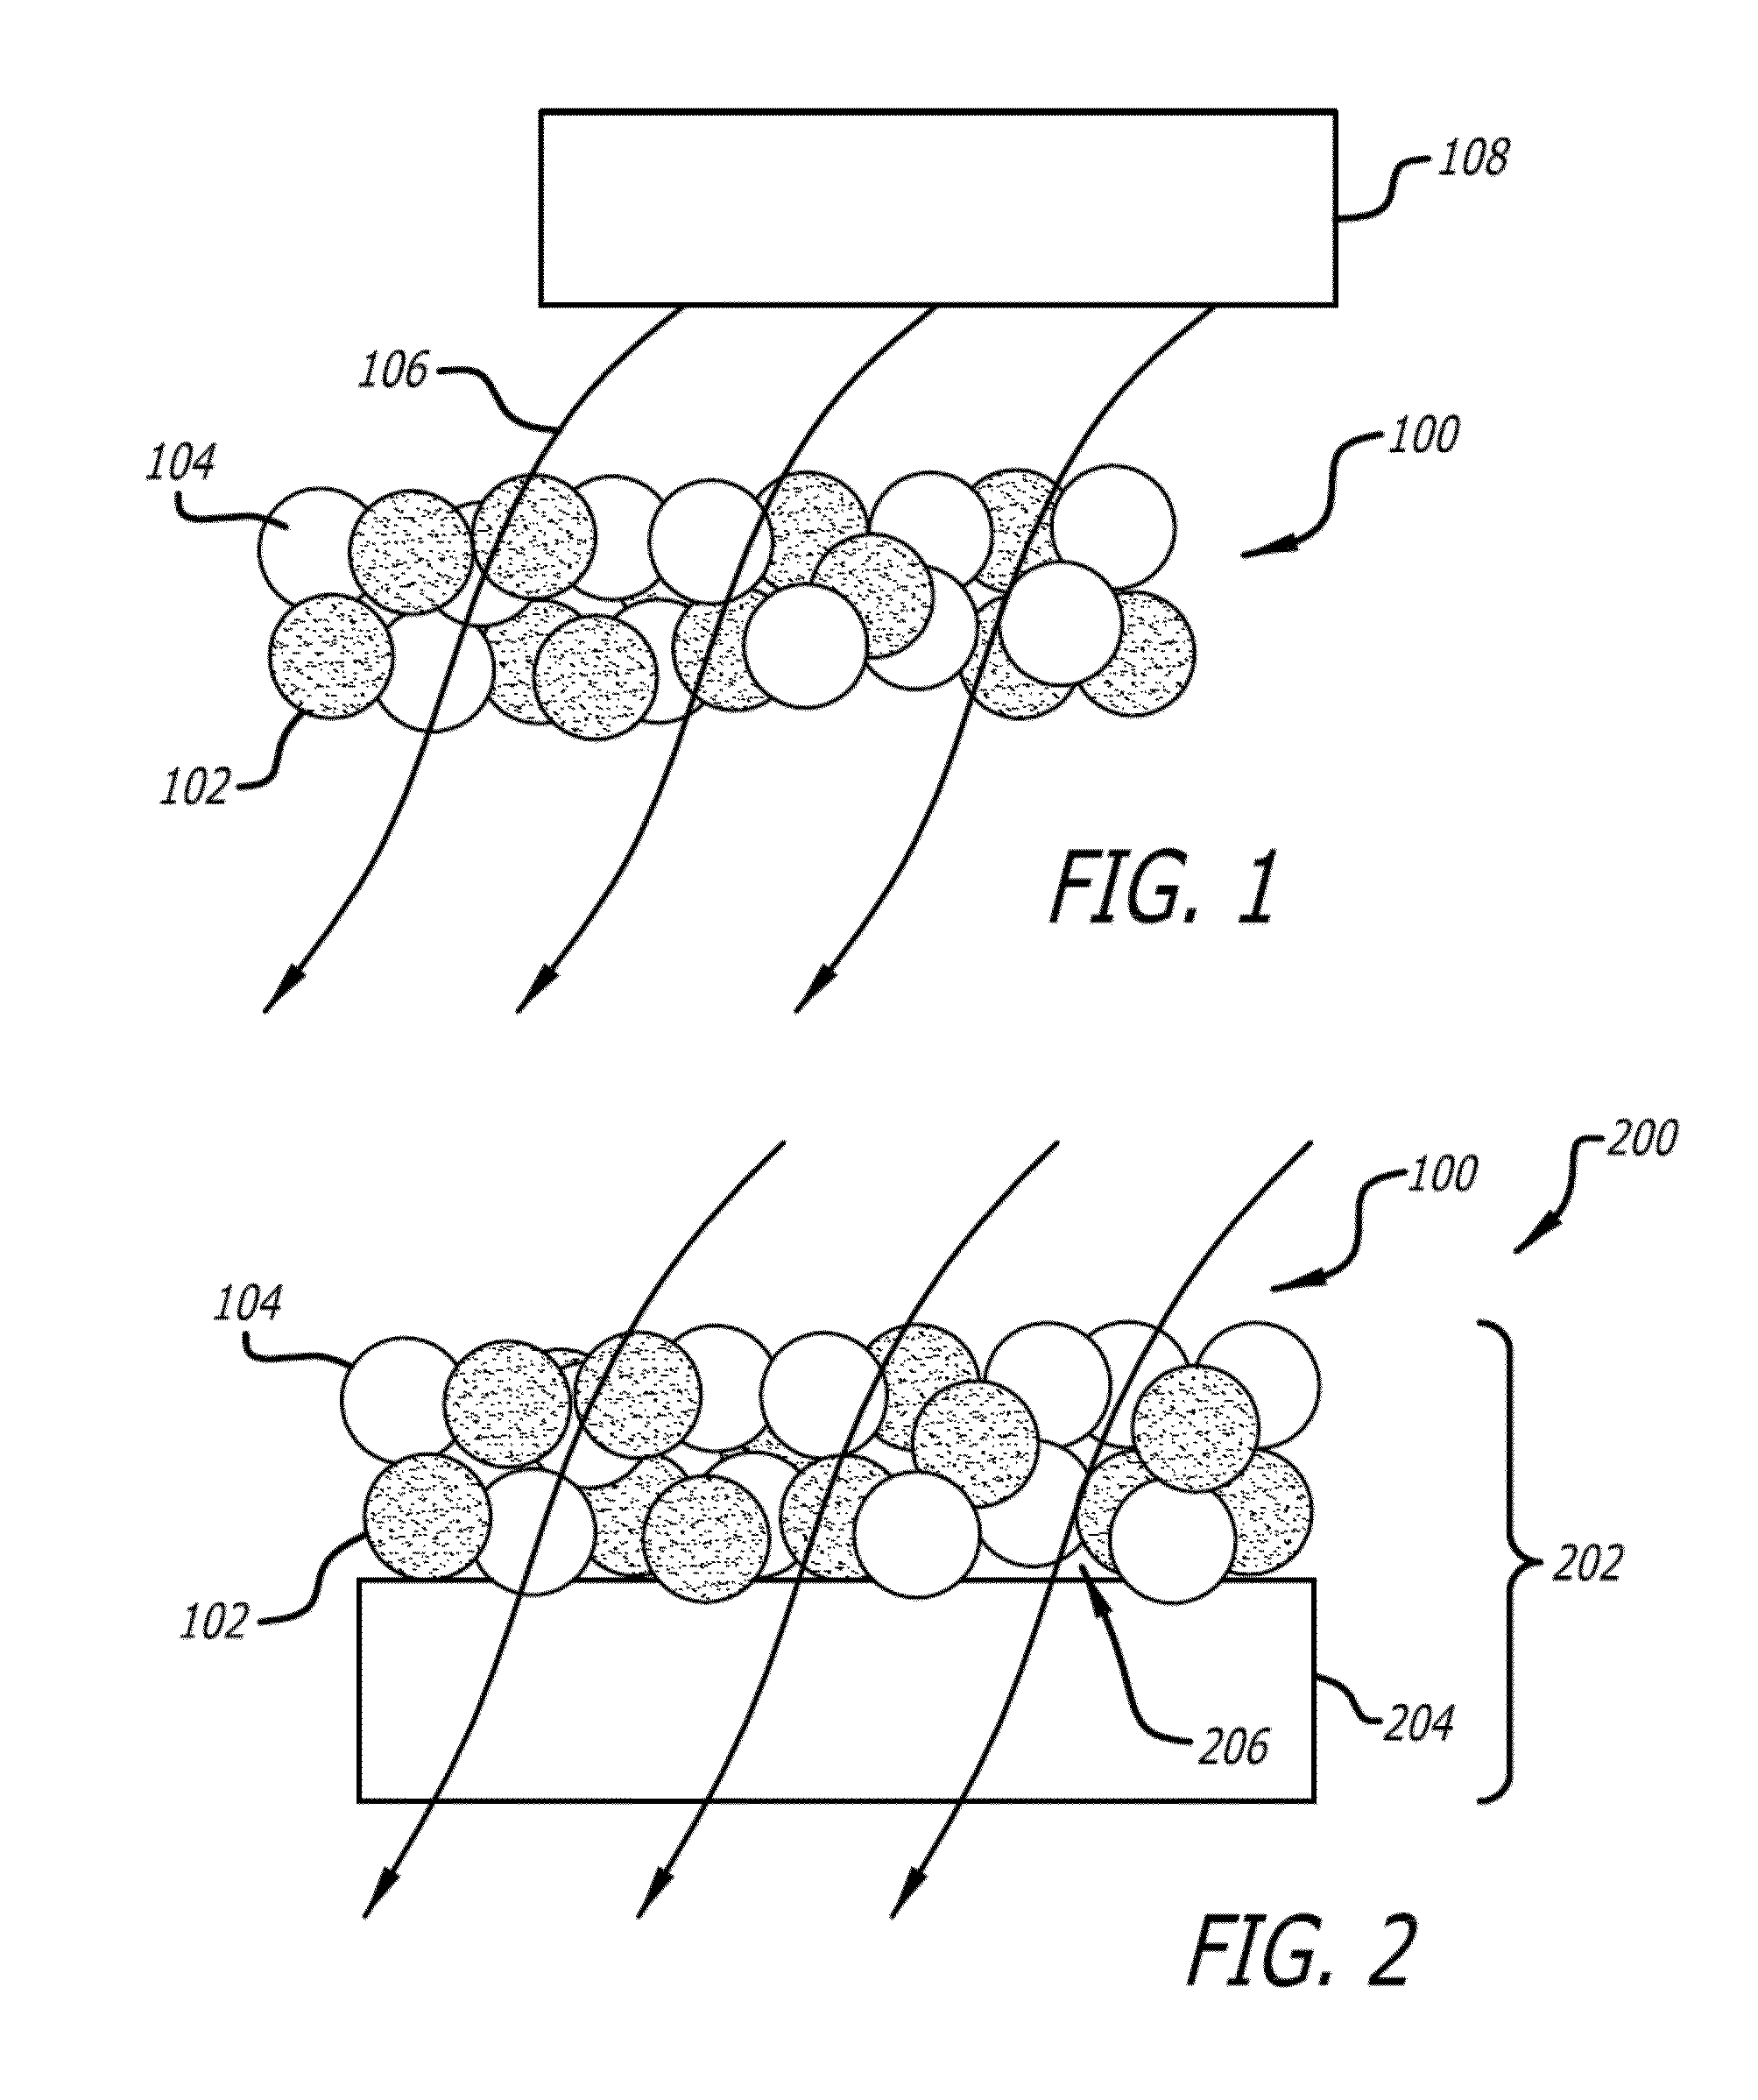 Filter Element for Decomposing Contaminants, System for Decomposing Contaminants and Method Using the System